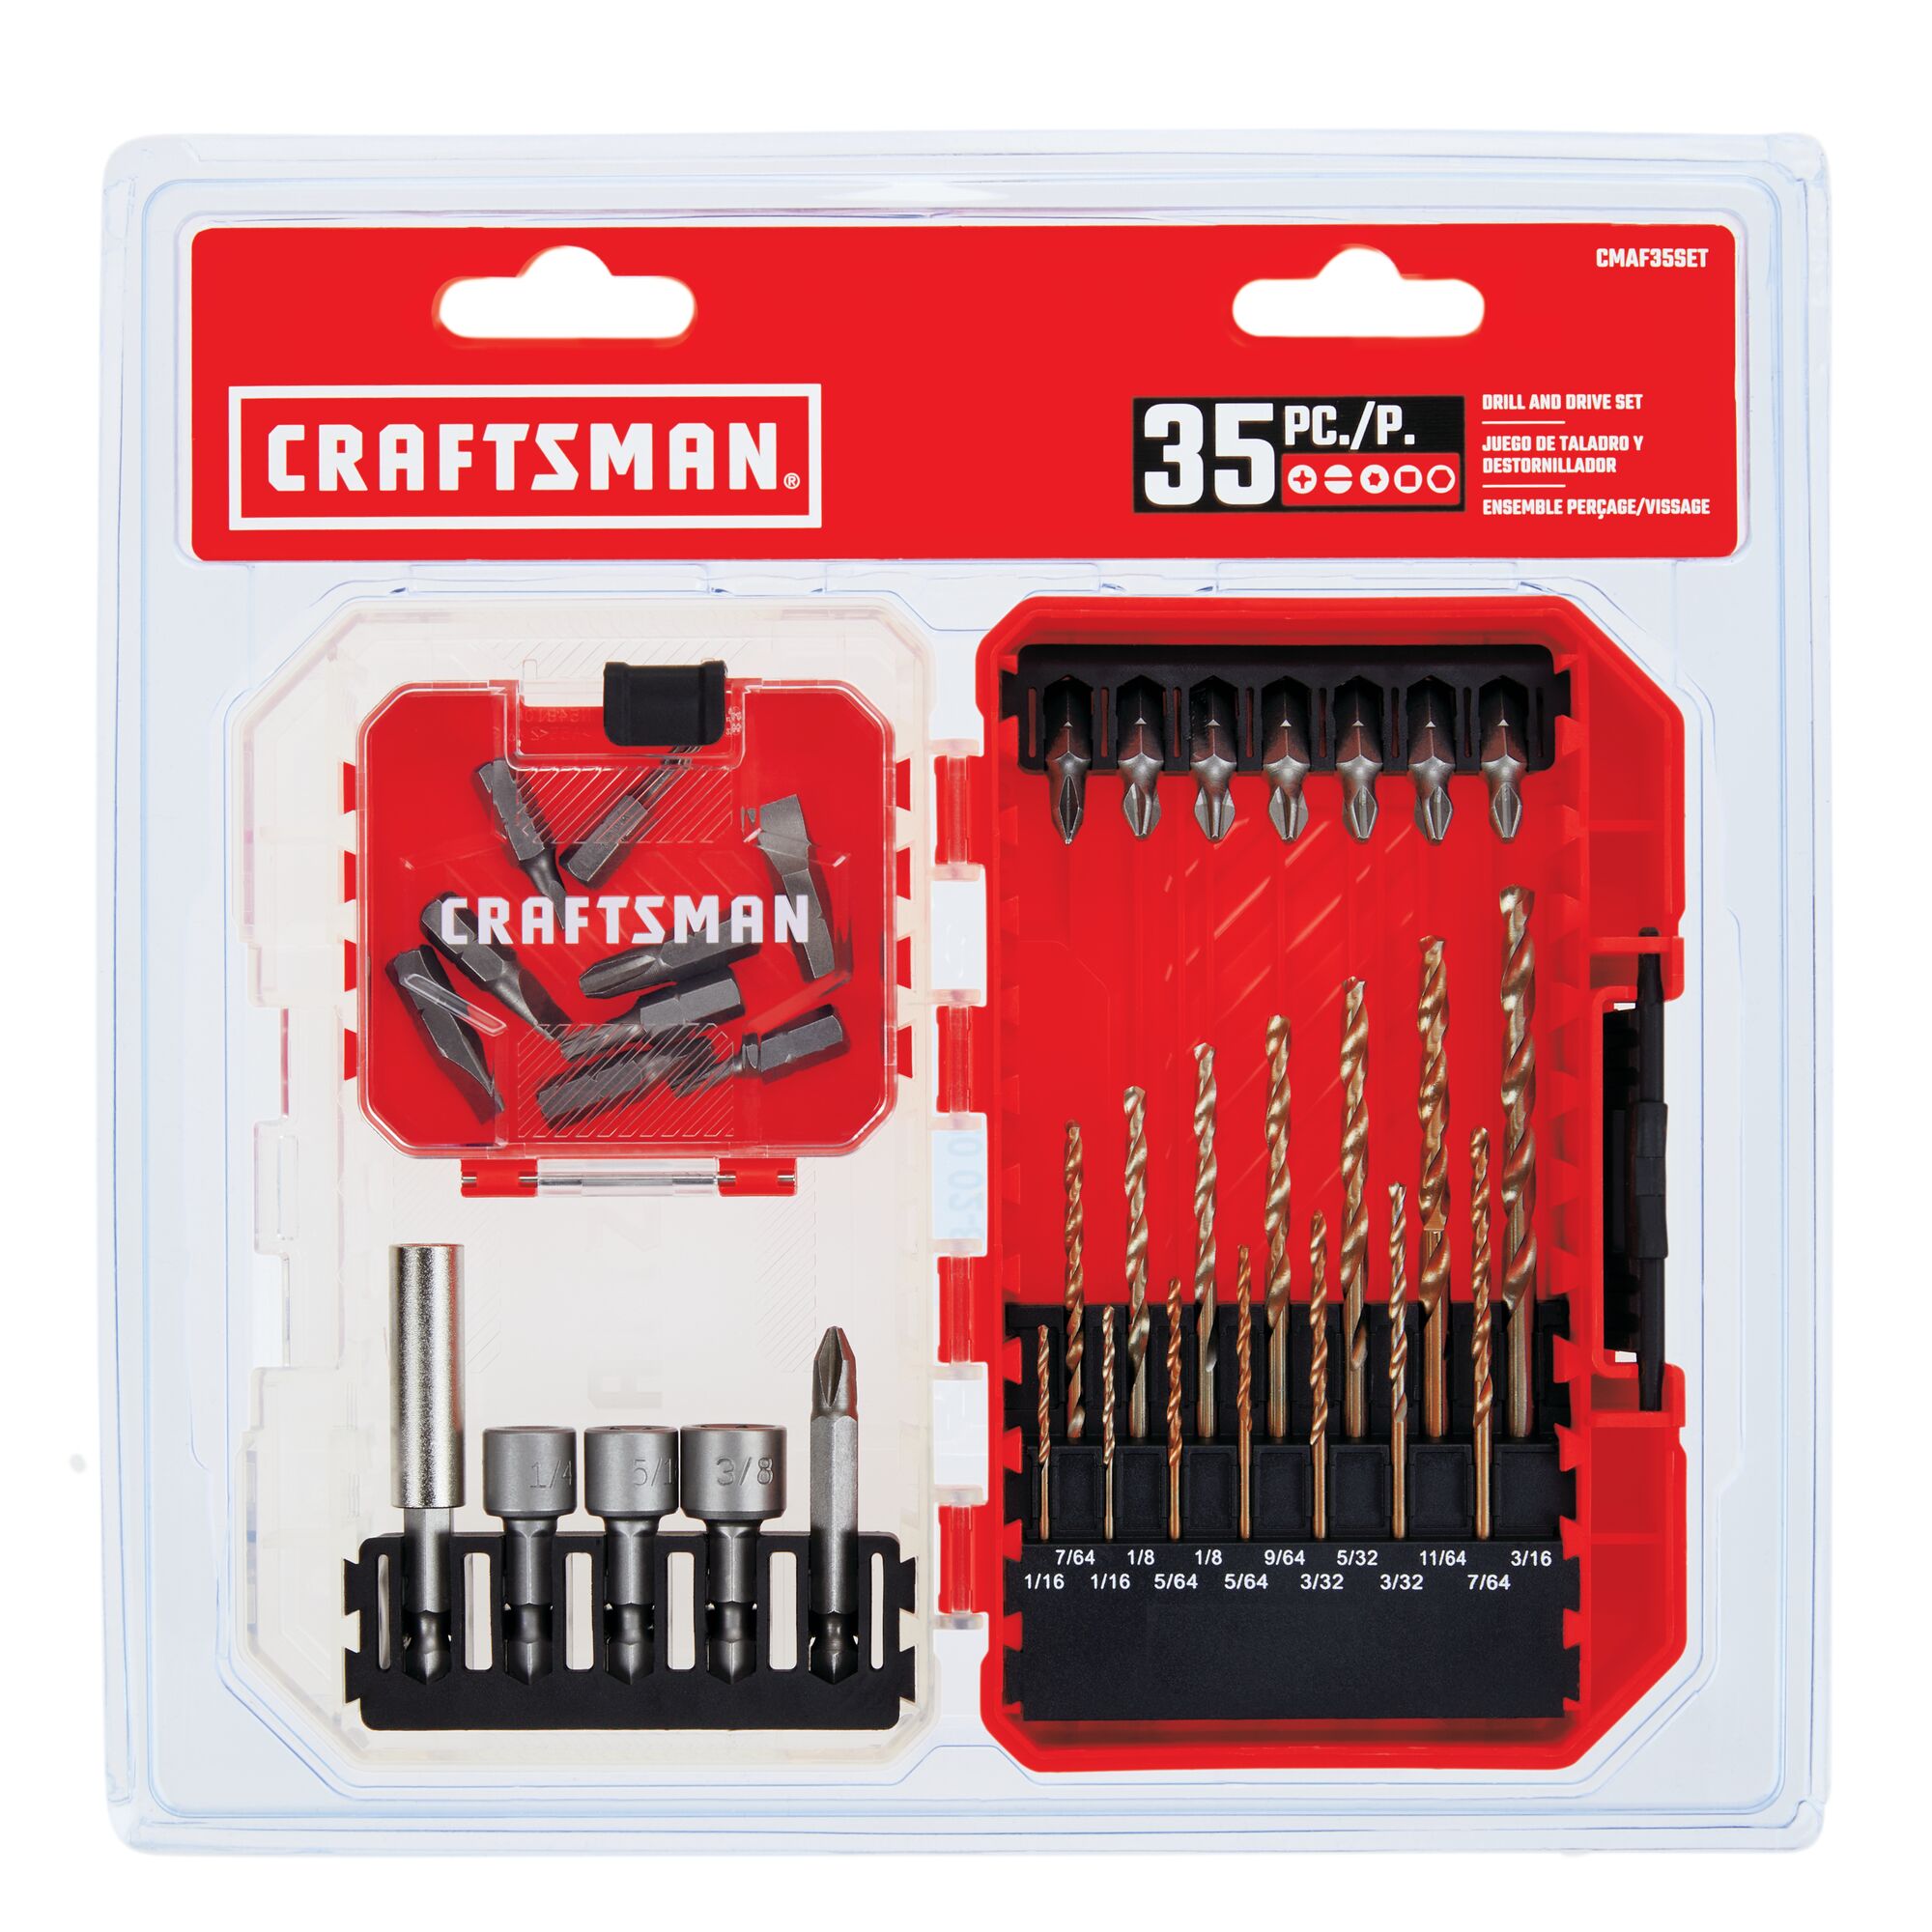 Screwdriver Bit Set Drill or Driver 35 piece in blister packaging.